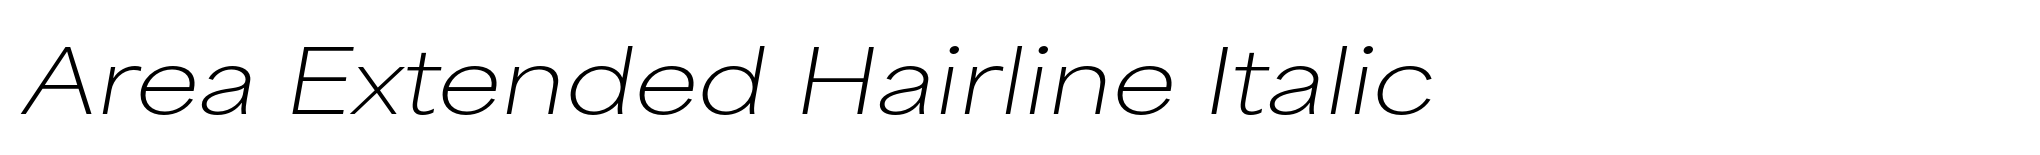 Area Extended Hairline Italic image